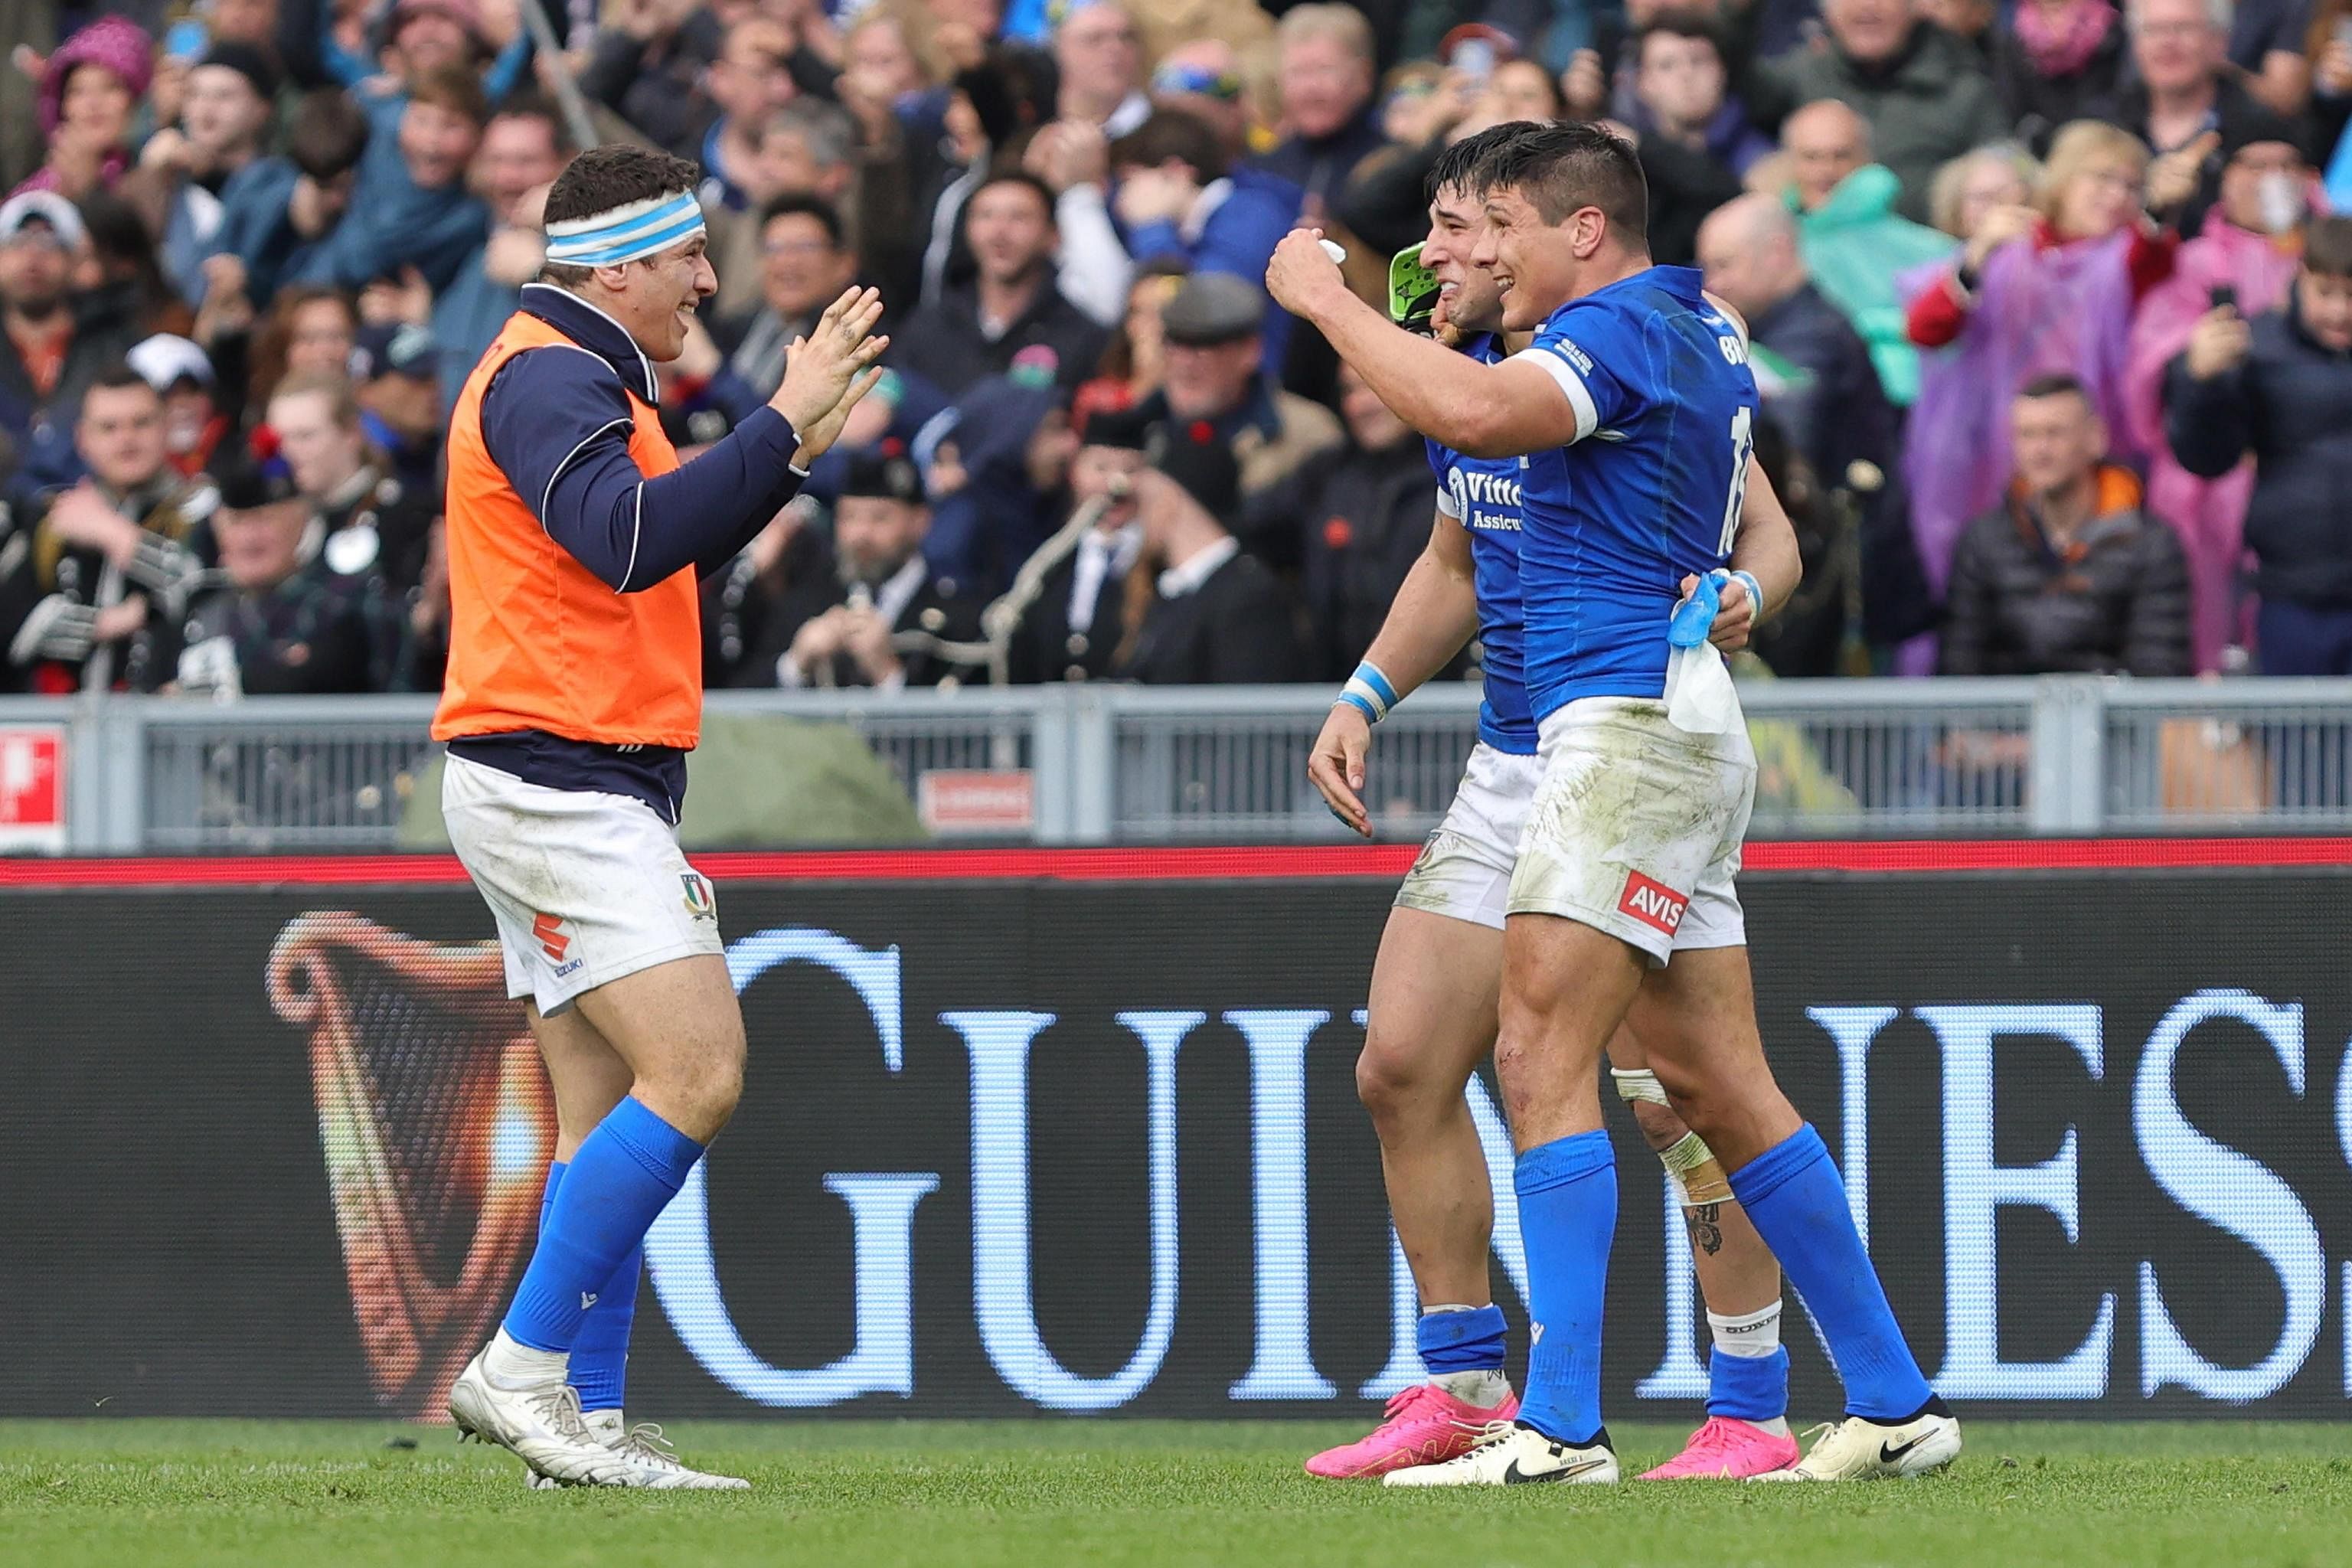 Gonzalo Quesada hails Italy’s ‘nutters’ after historic Scotland win in Six Nations